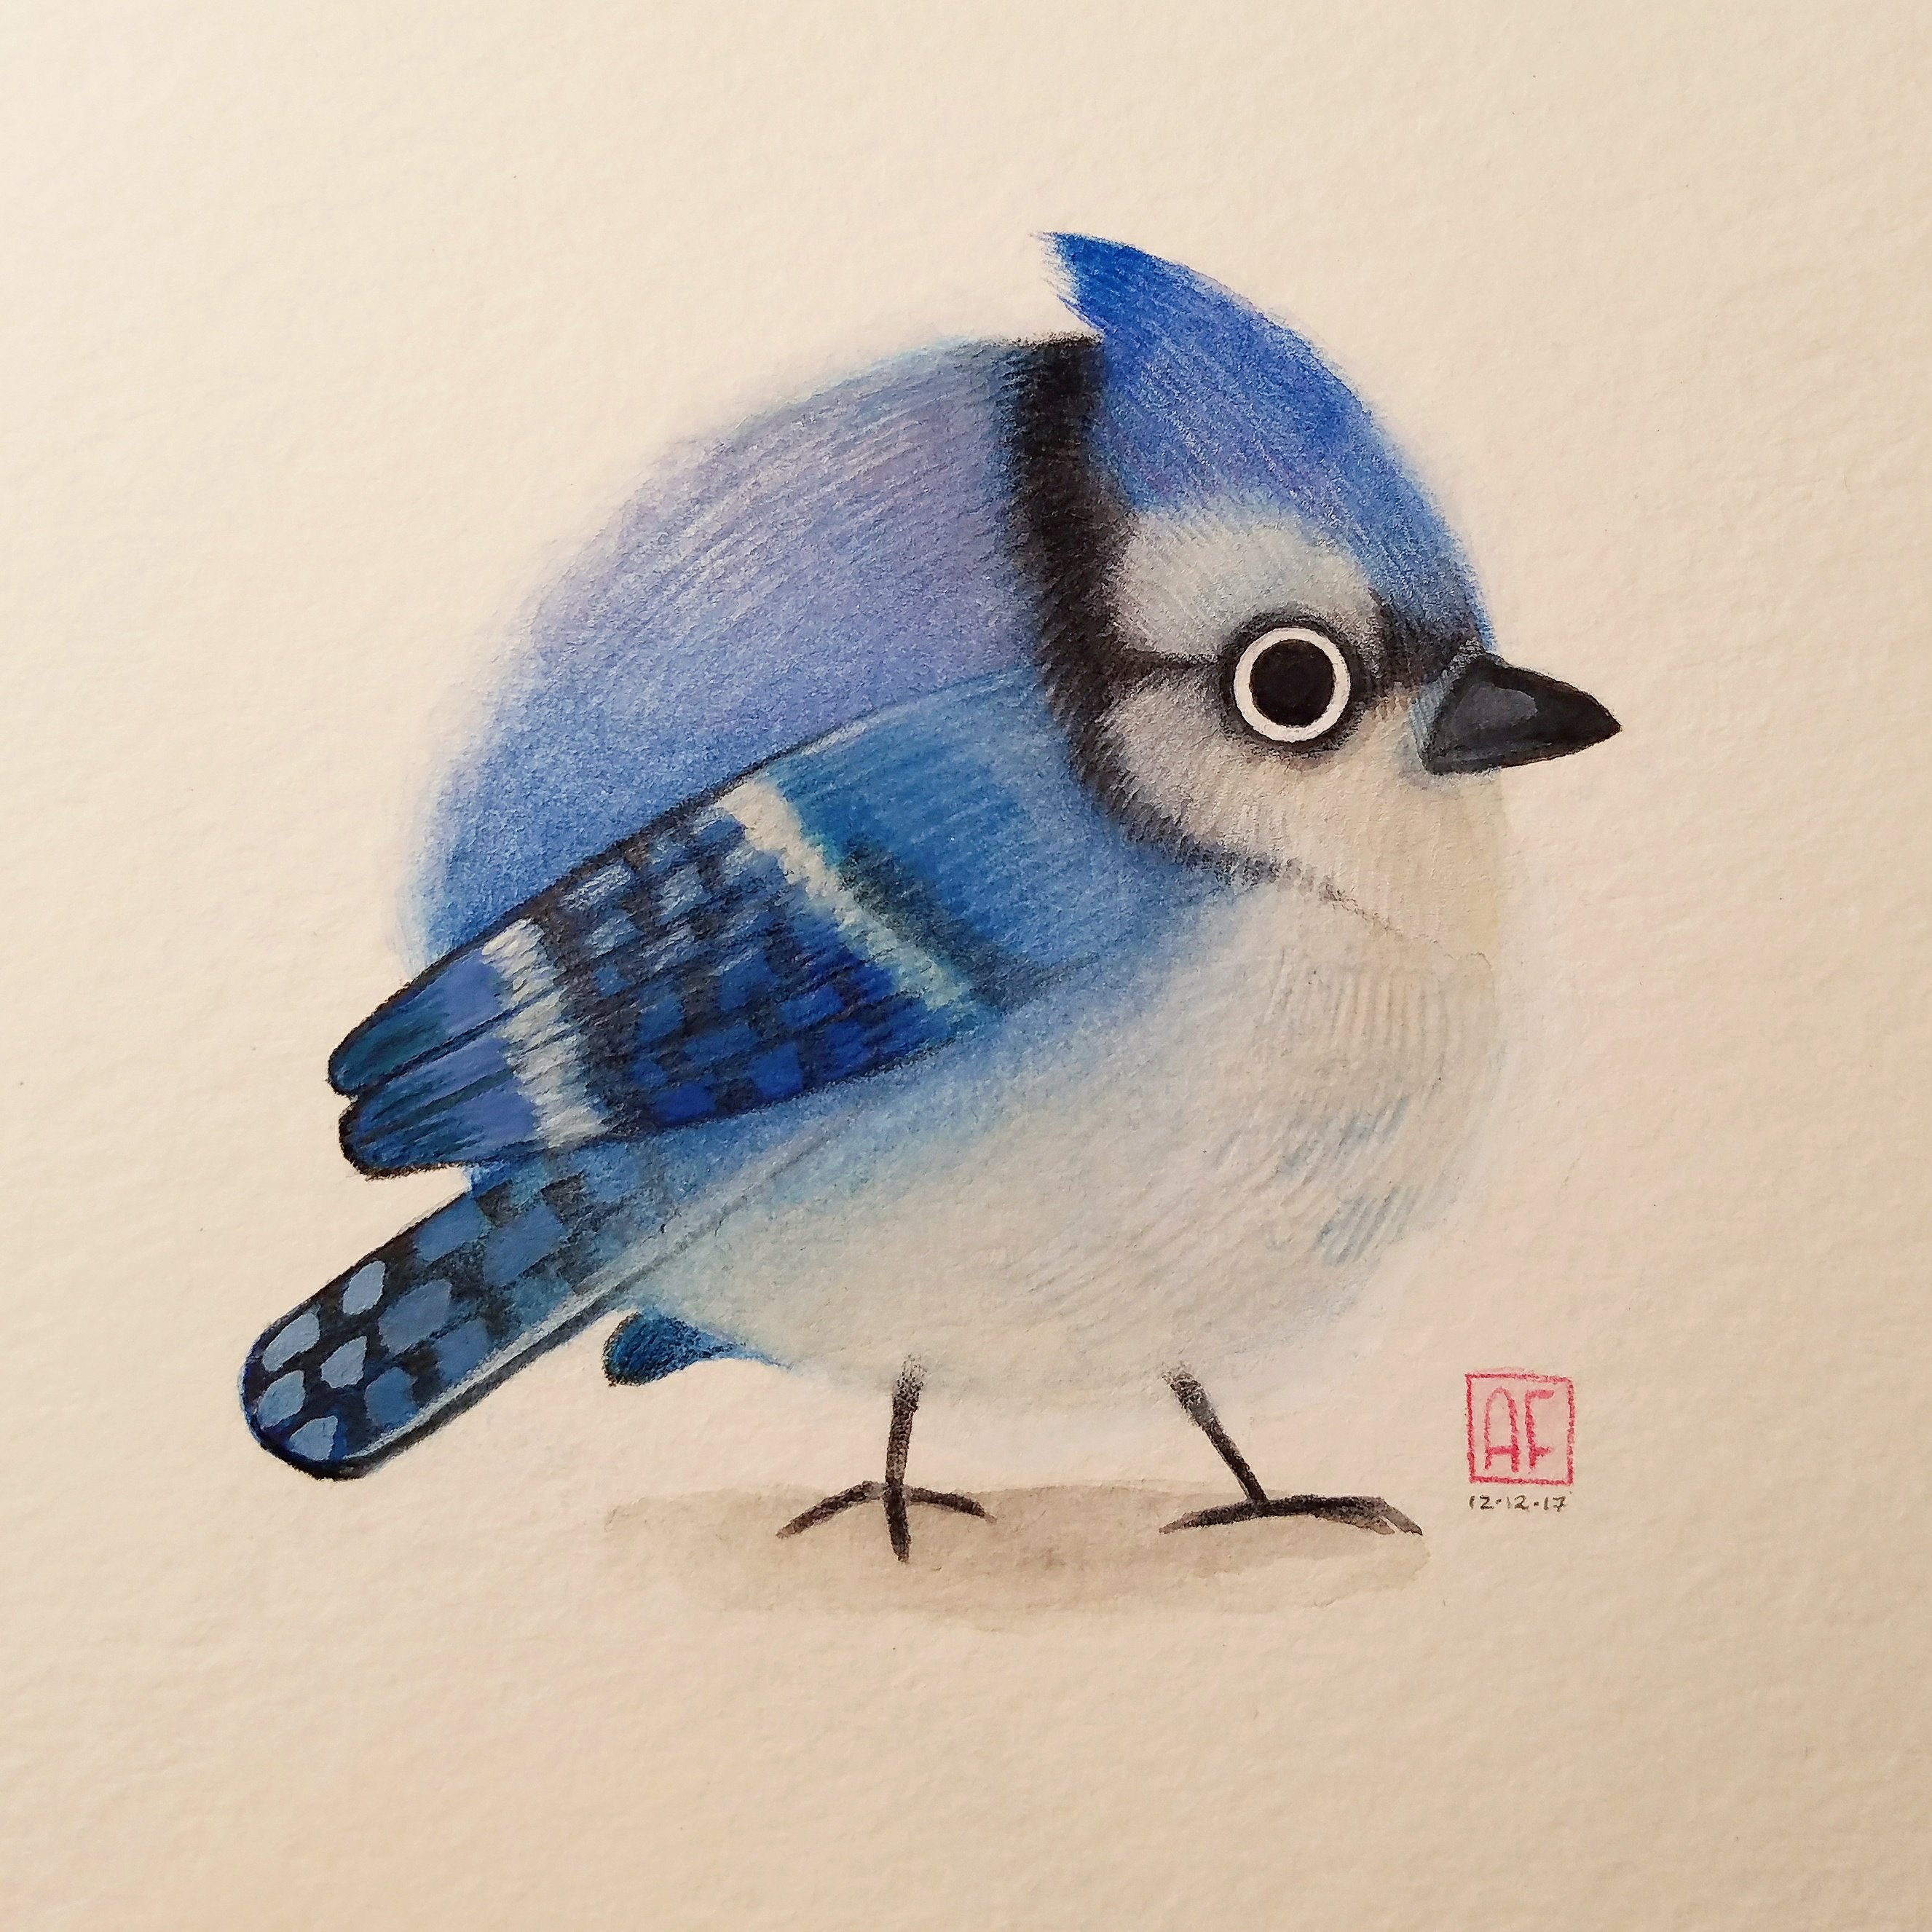 Ashley Fairbourne on X: I'm back! And so are these cute birdies! Decided  to paint a Blue Jay today! #birds #illustration #painting #paint  #watercolor #art #artist #birdwatching #cute #cartoon   / X